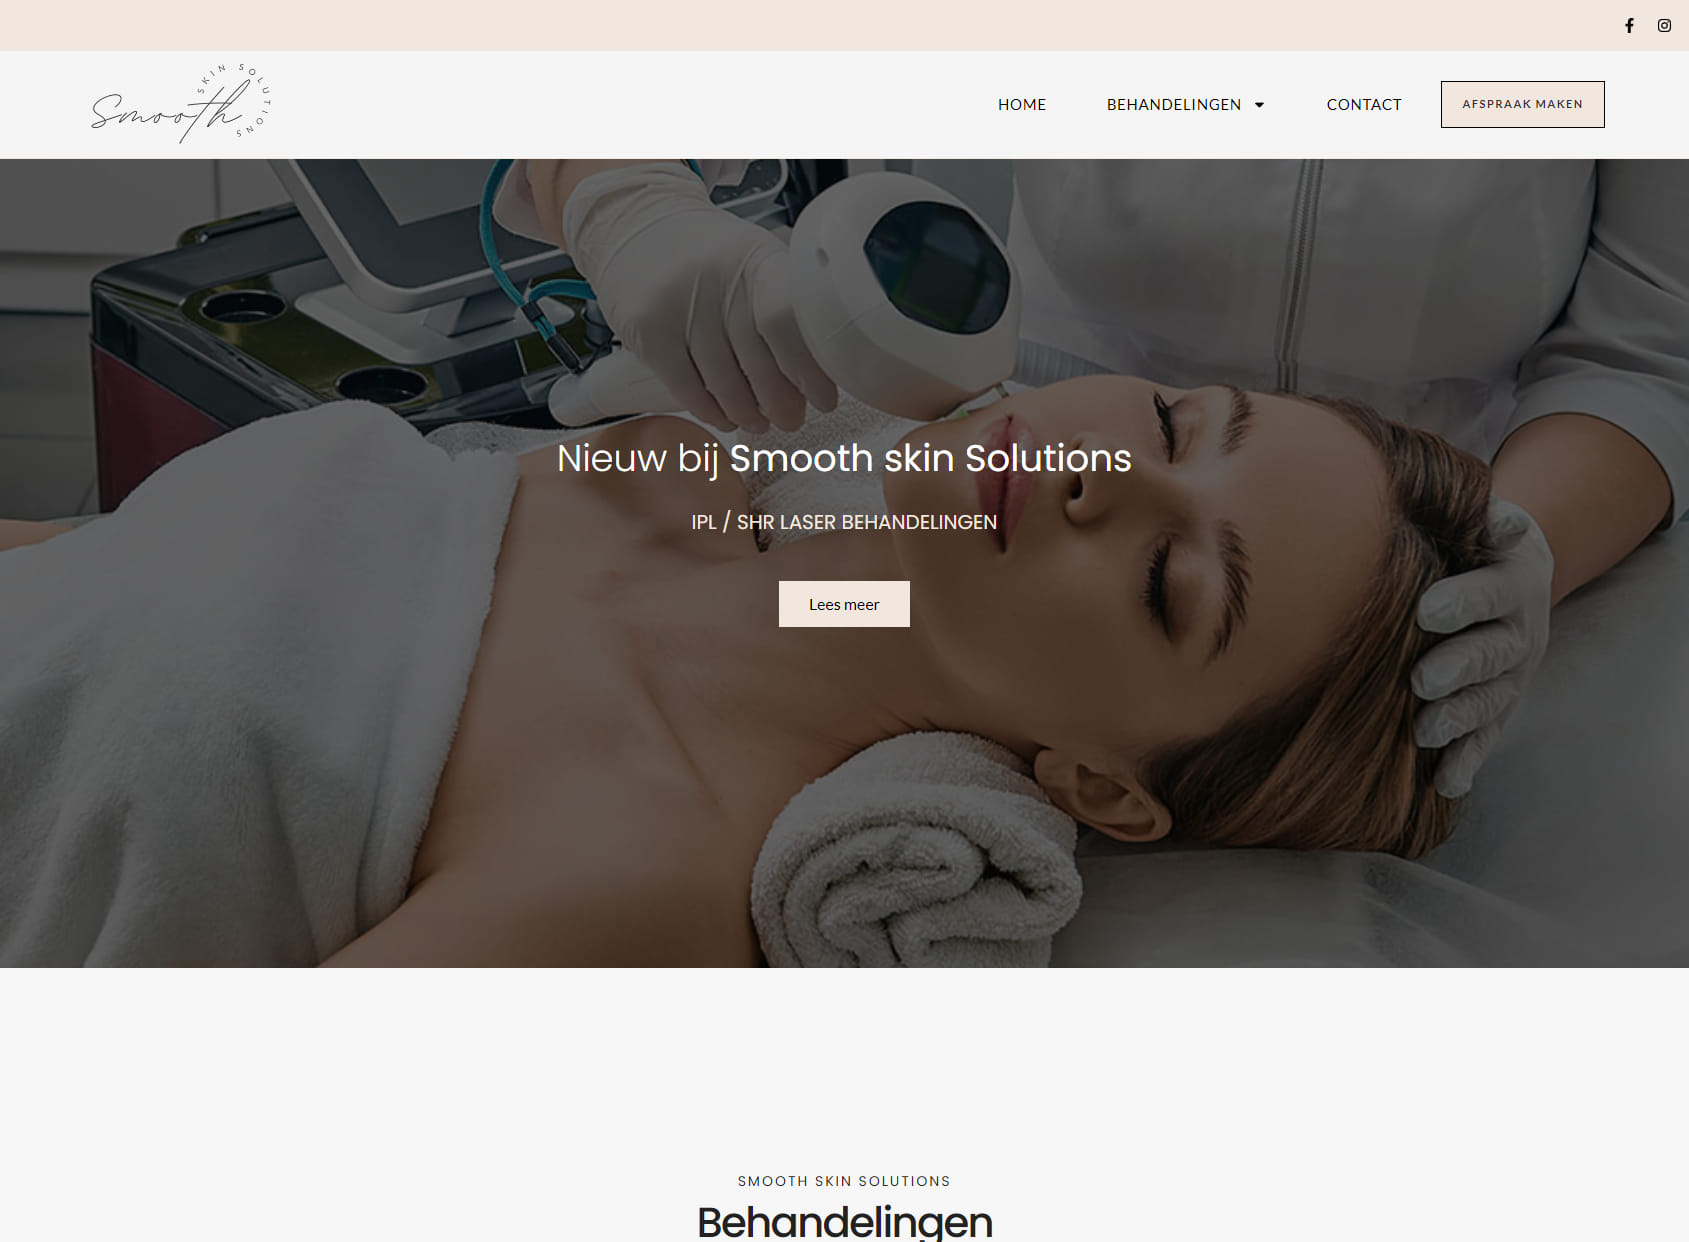 Smoothskinsolutions.nl